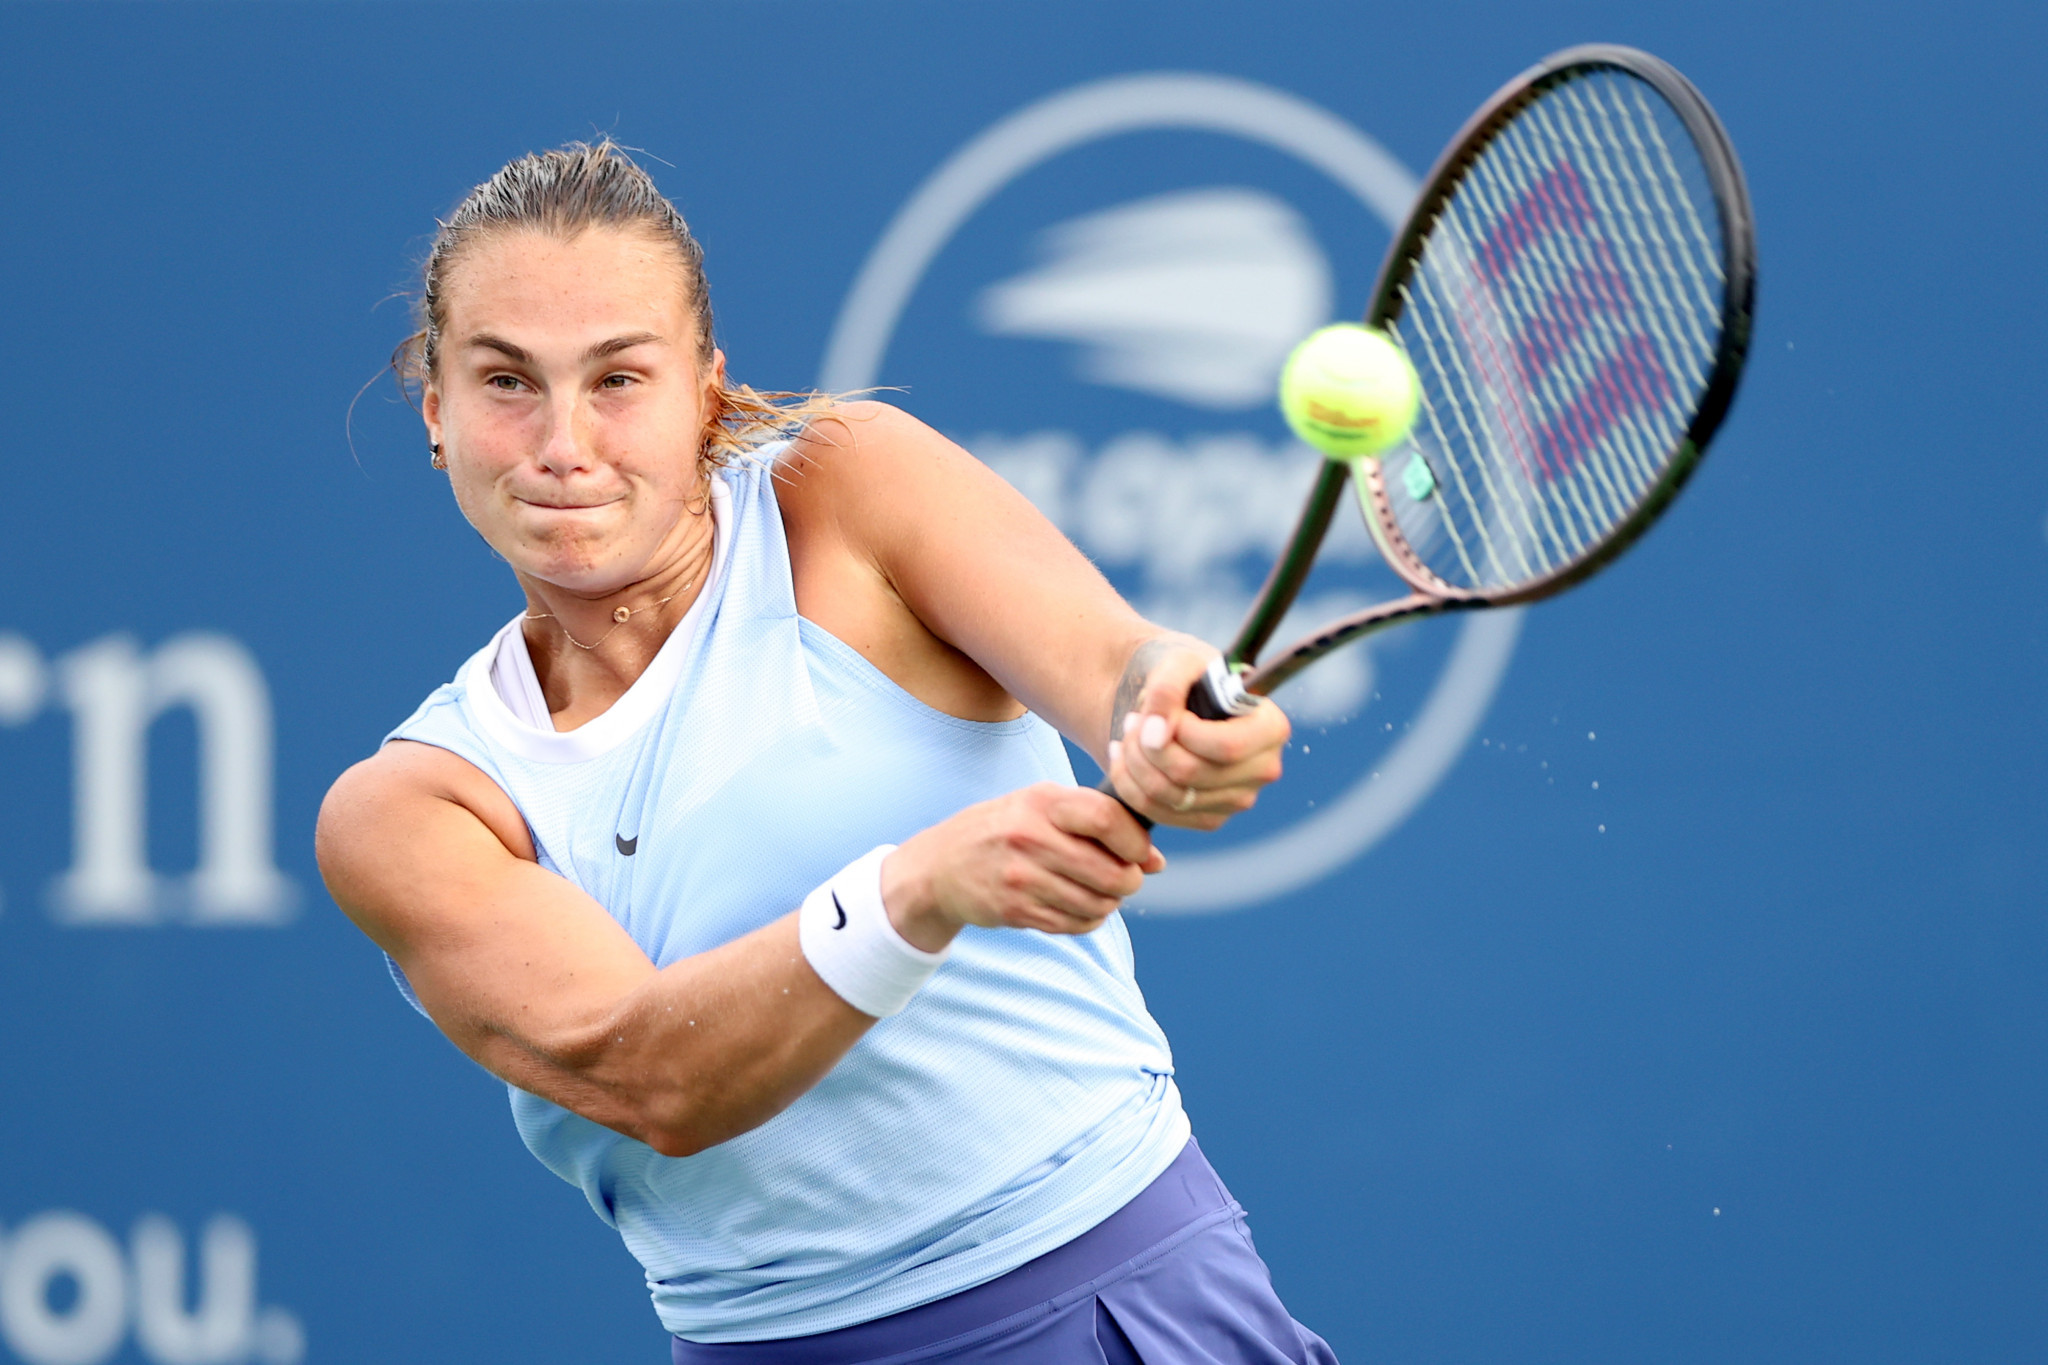 COVID-19 vaccinations have proved a major talking point on both the WTA and ATP Tours in recent months, with women's world number three Aryna Sabalenka among those who has publicly expressed some hesitancy ©Getty Images